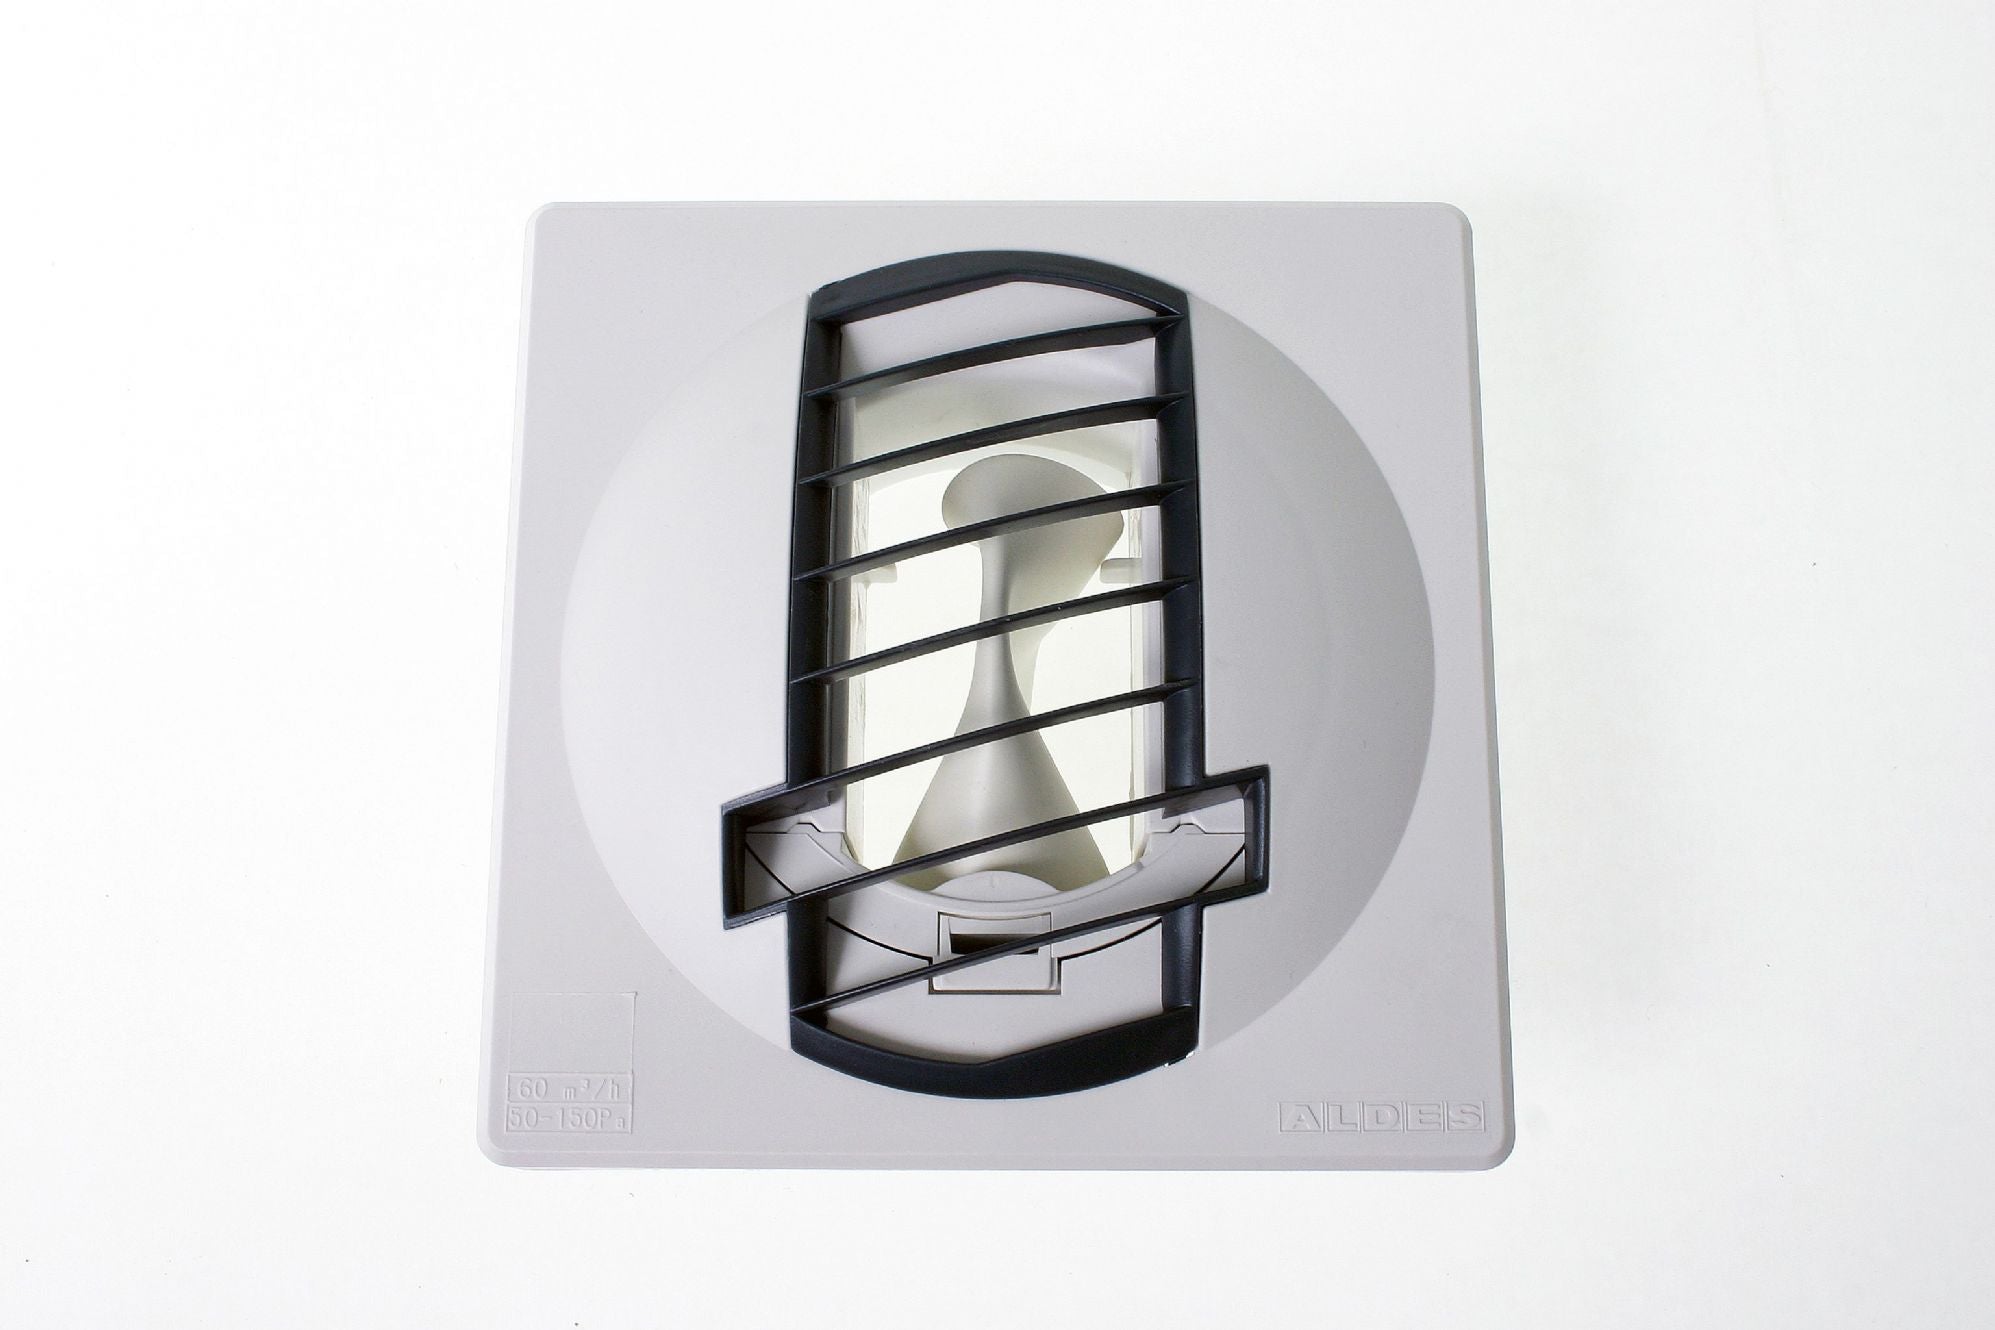 Aldes Extract Vent Centerpiece (for Part 01060001) (Product Code: 03010049 ALTOR 11019411